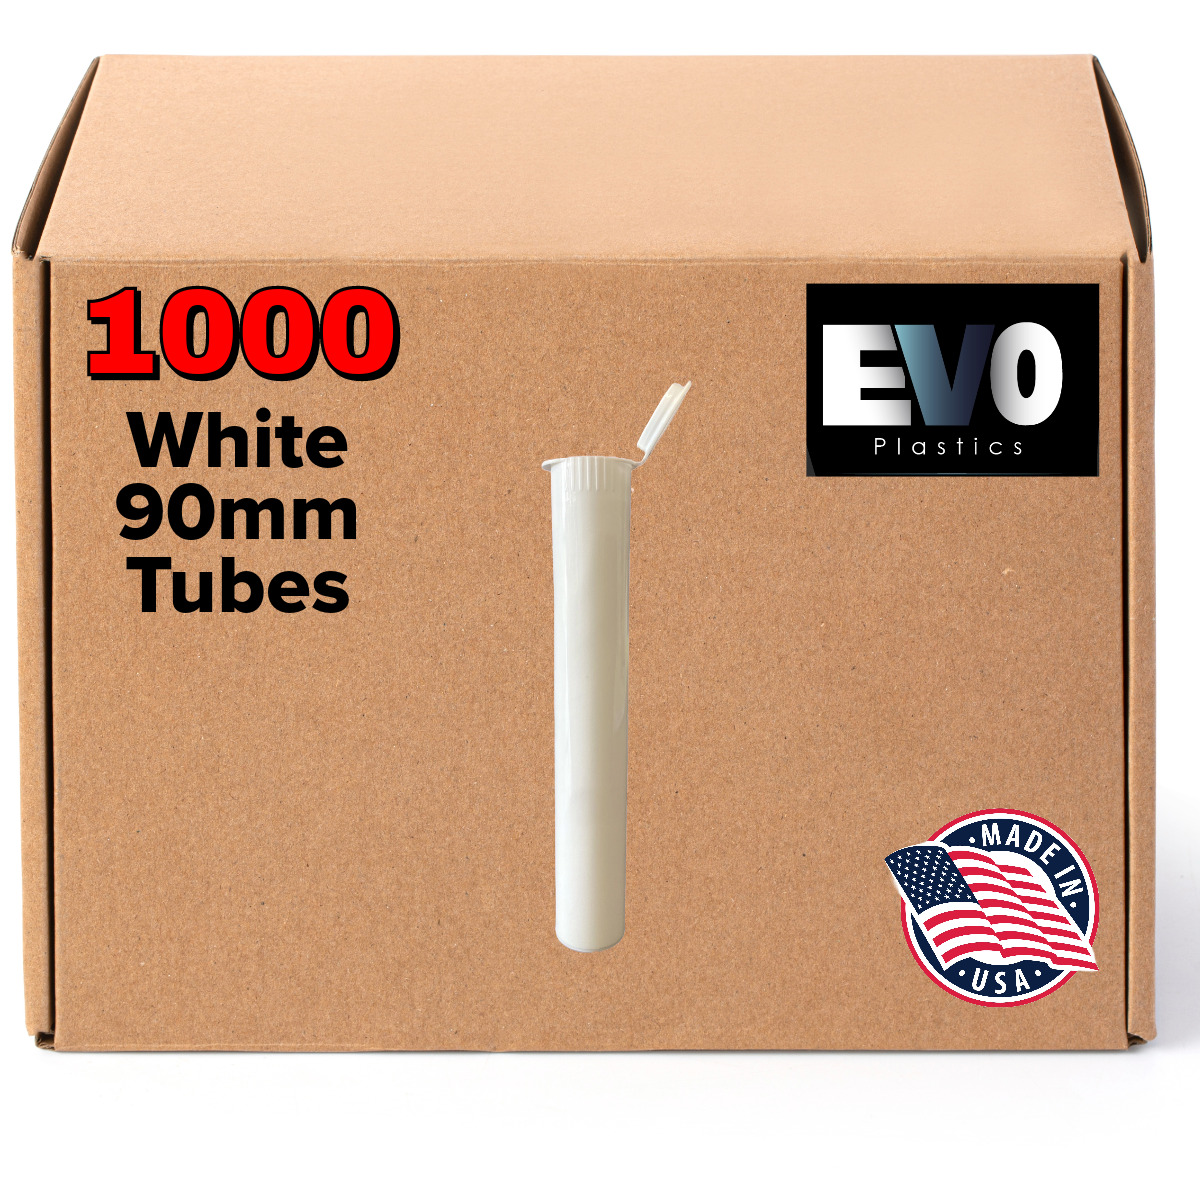 90mm Tubes - White - 1000 count , Pop Top Joints, BPA-Free Pre-Roll - USA Made